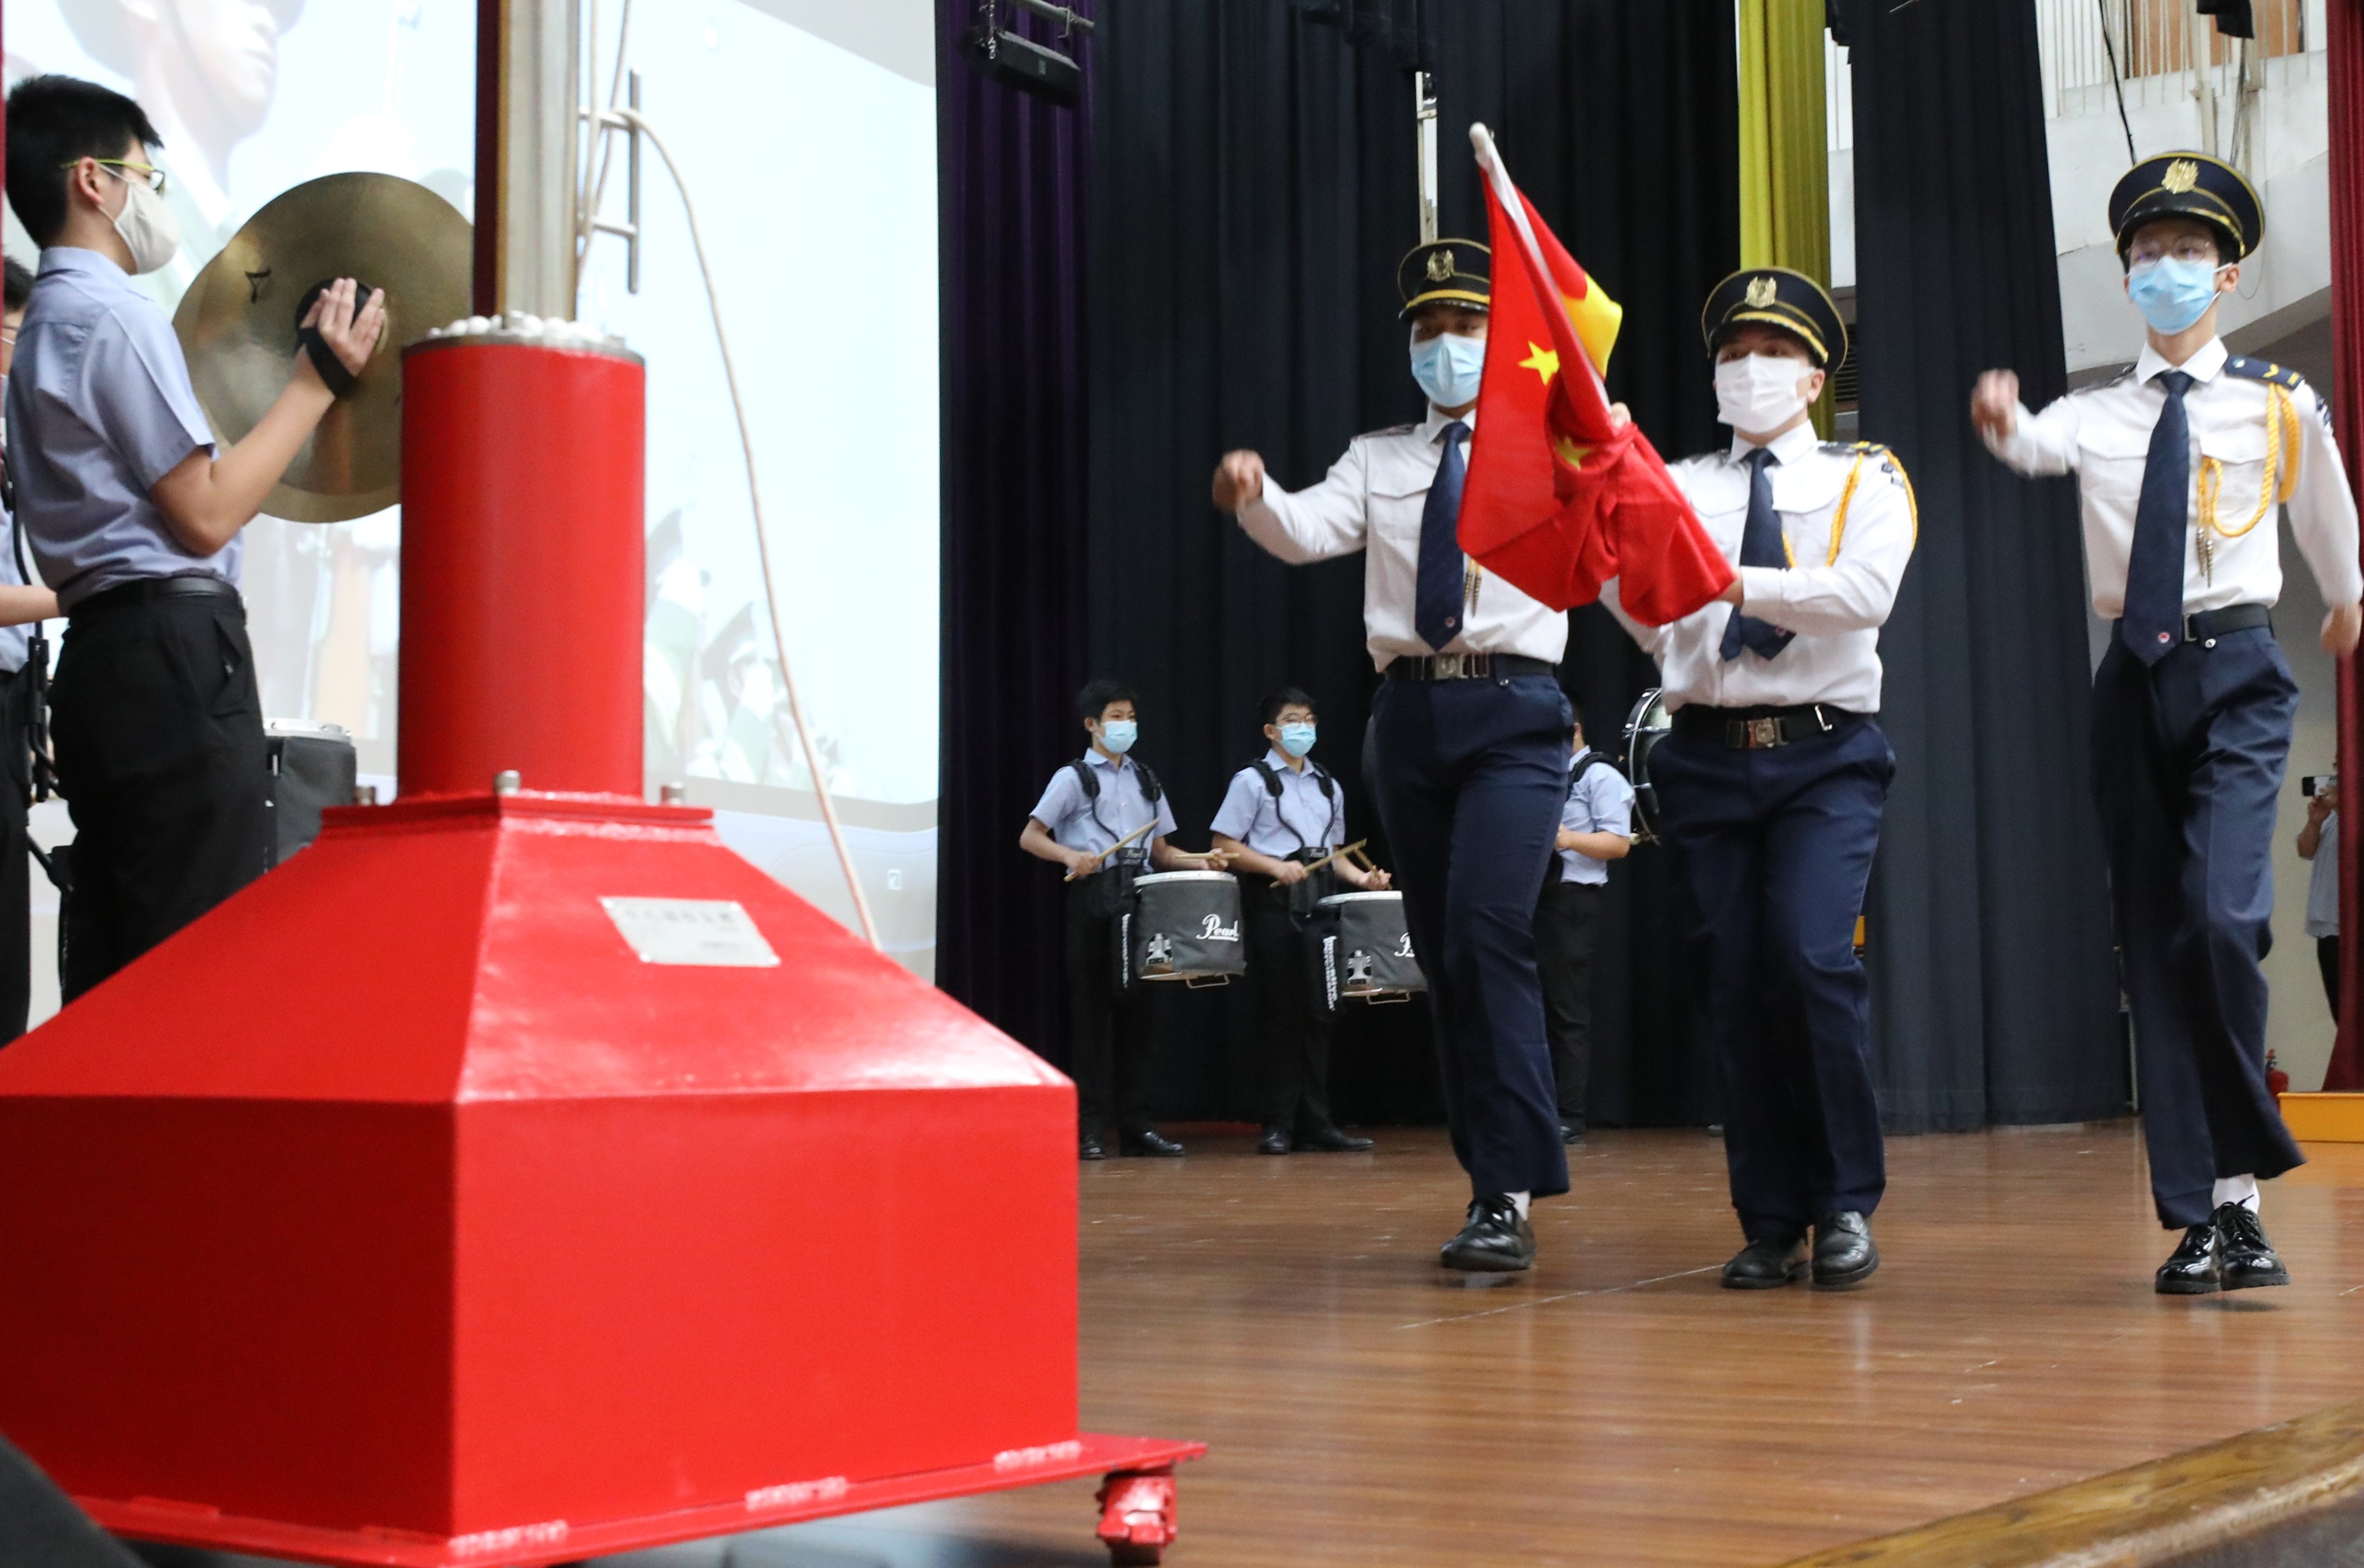 Students take part in a flag-raising ceremony at a school in Ho Man Tin on July 1, 2020. Photo: May Tse